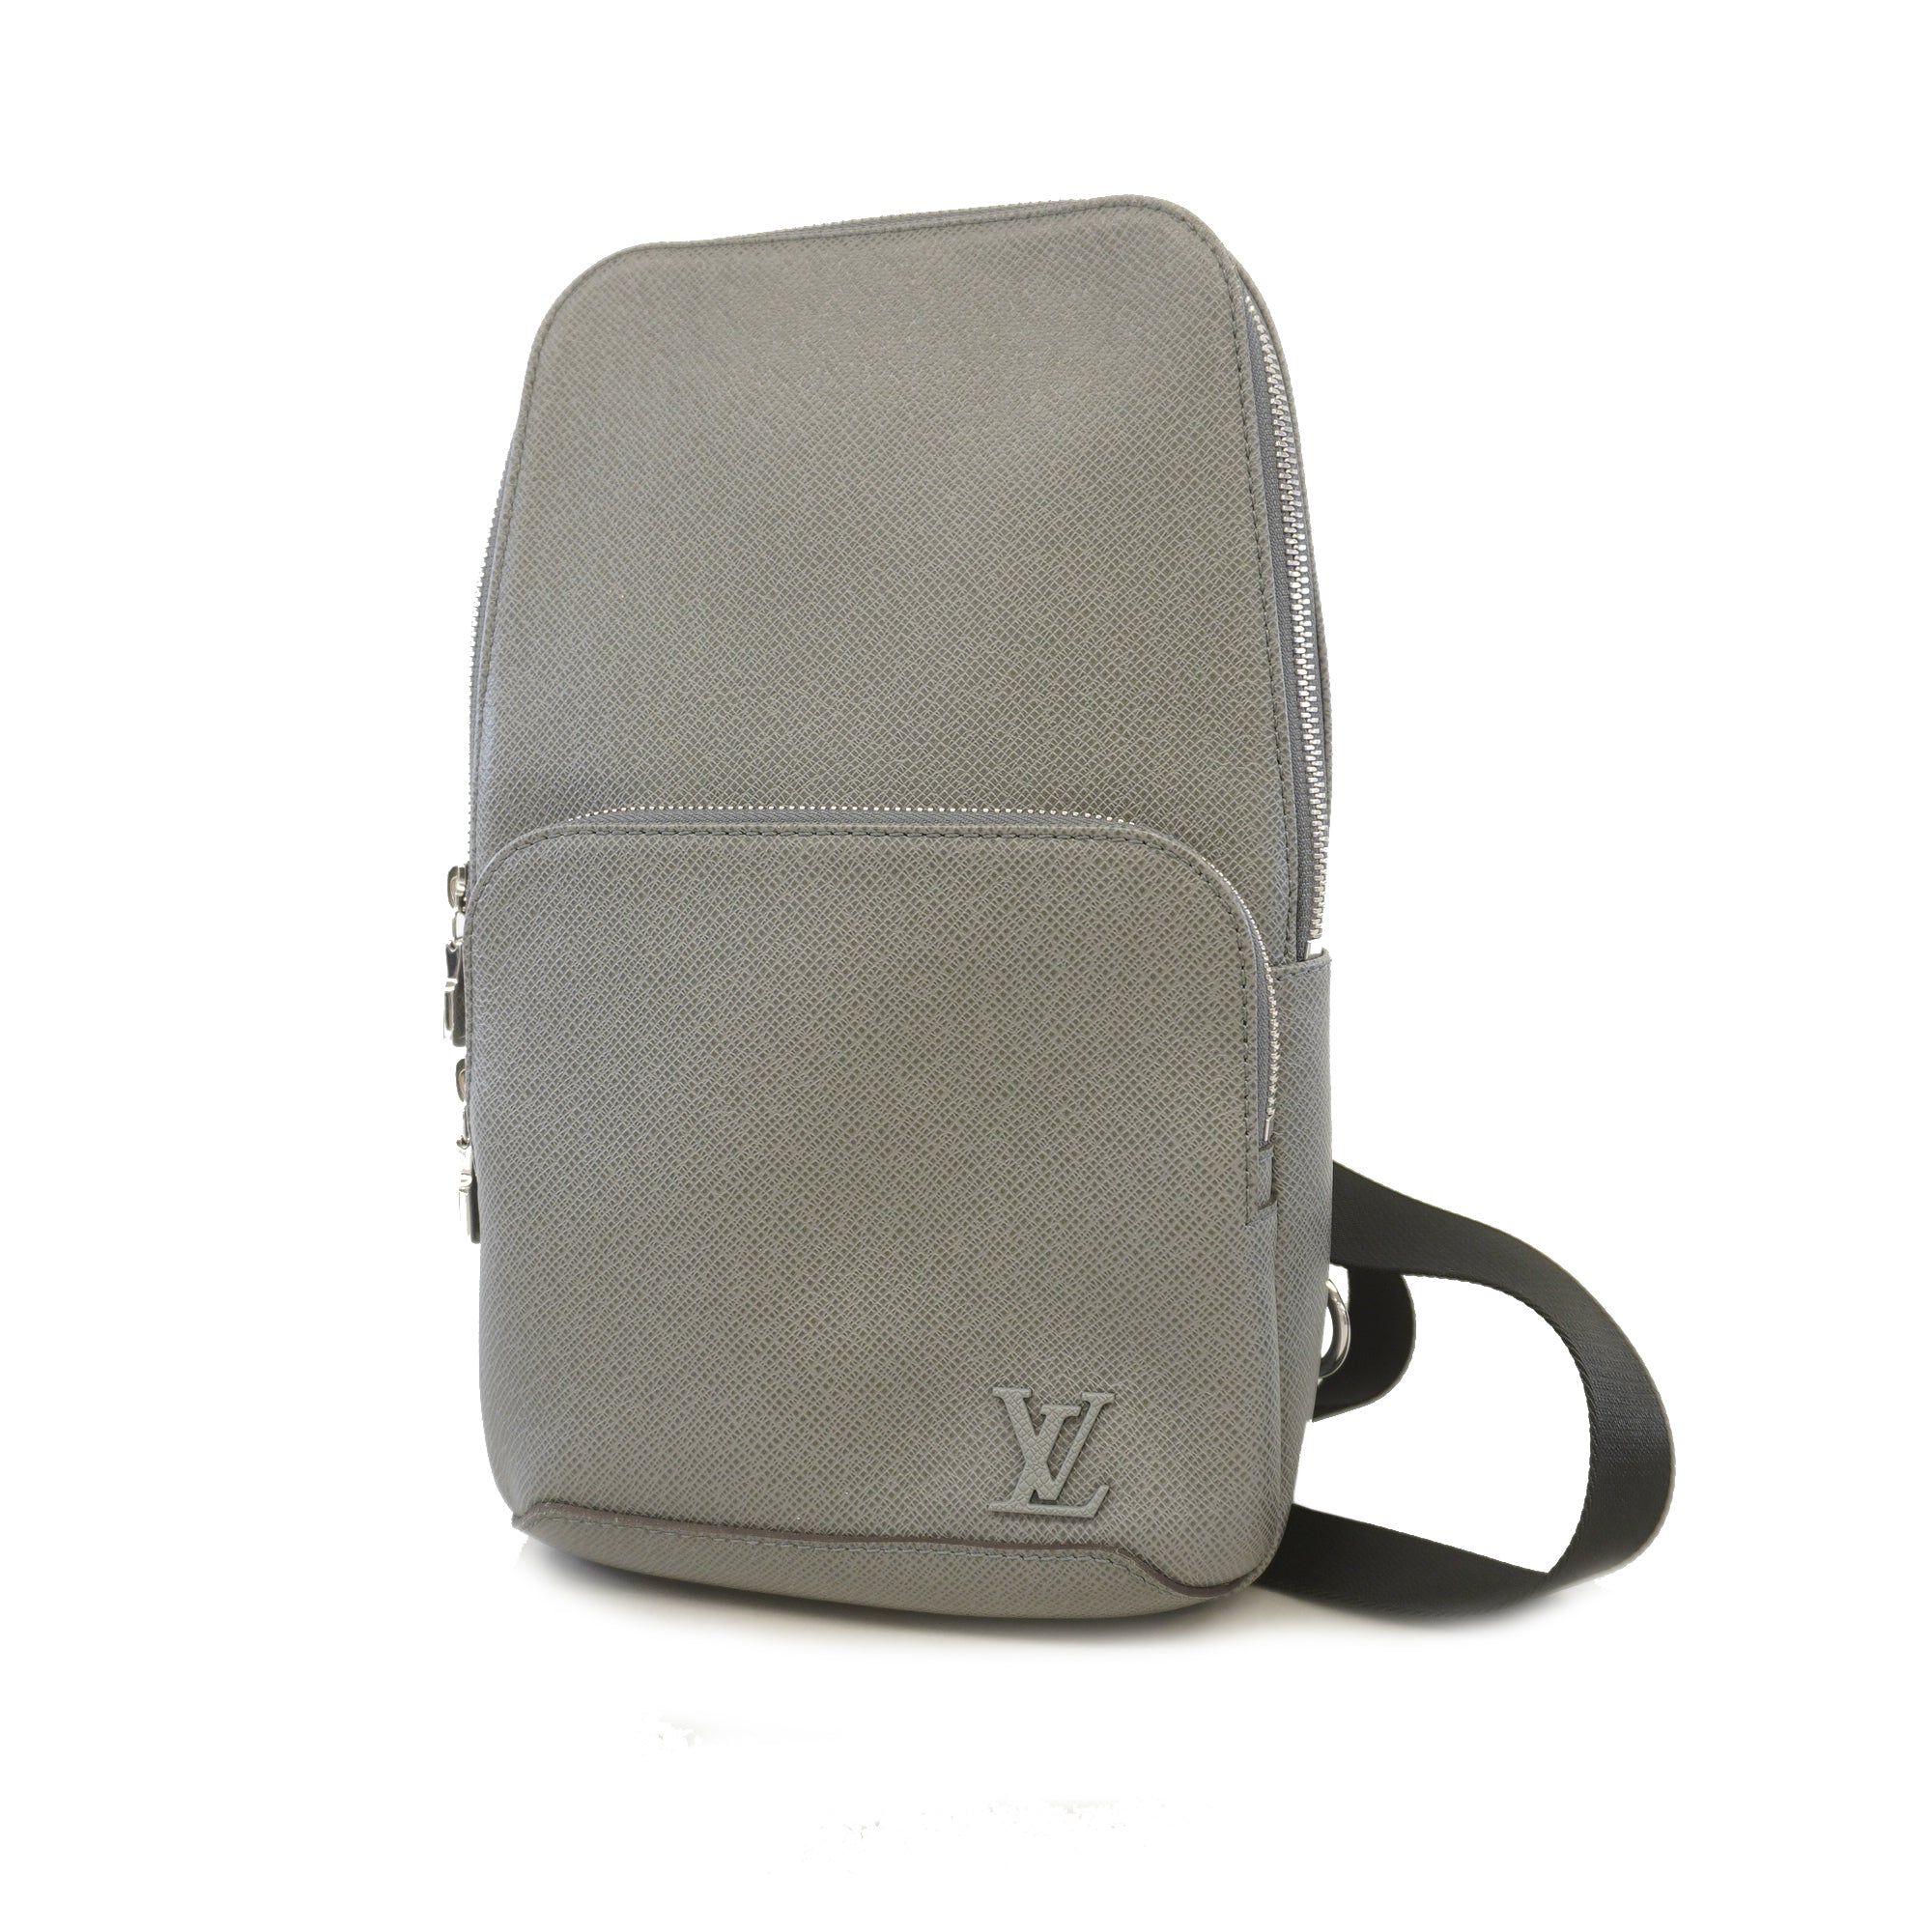 Louis Vuitton M30443 LV Avenue Sling Bag in Black Taiga leather